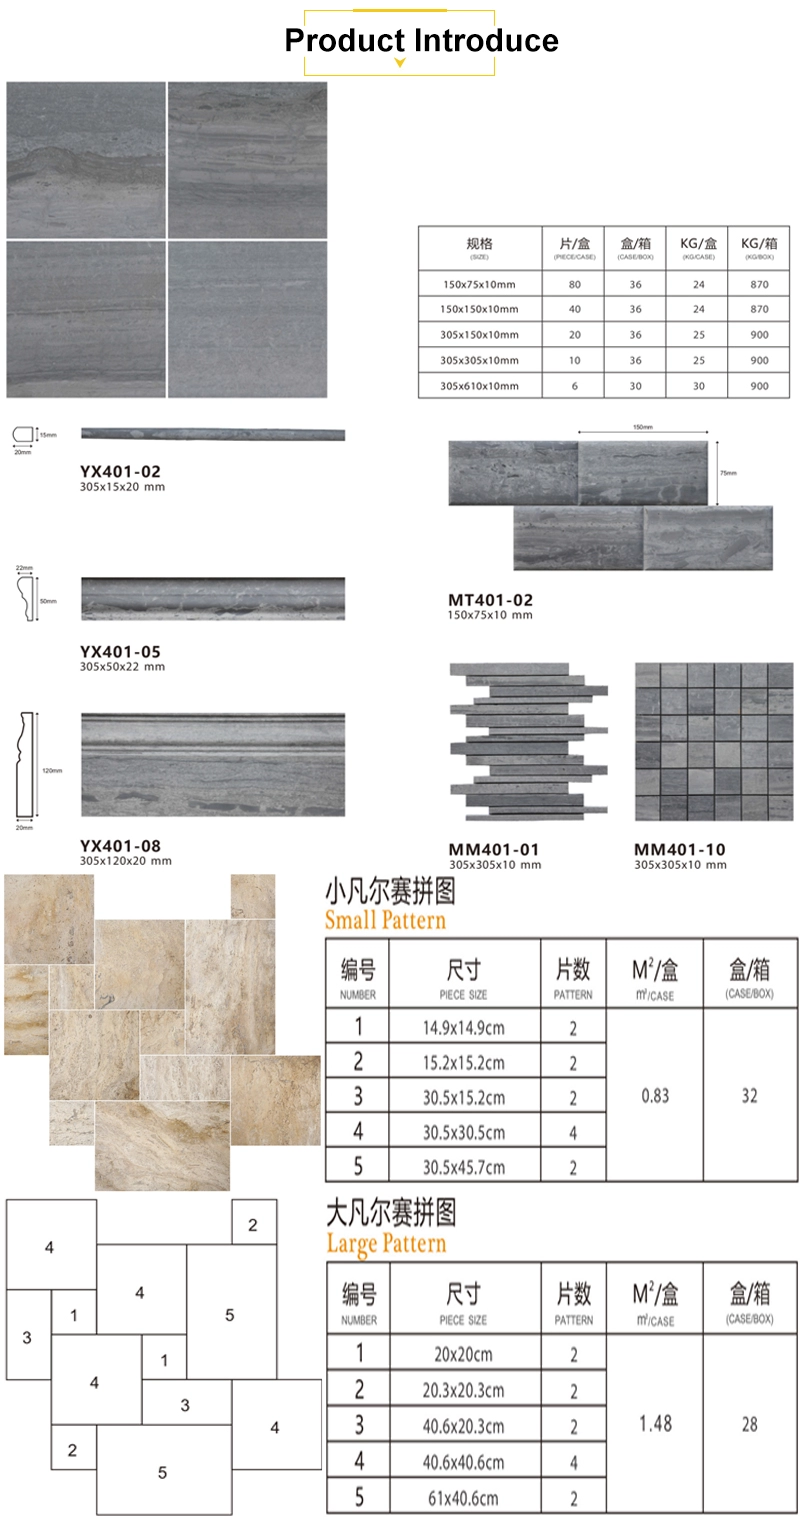 Bulk french pattern floor tiles tumbled and honed and chiseled limestone or marble